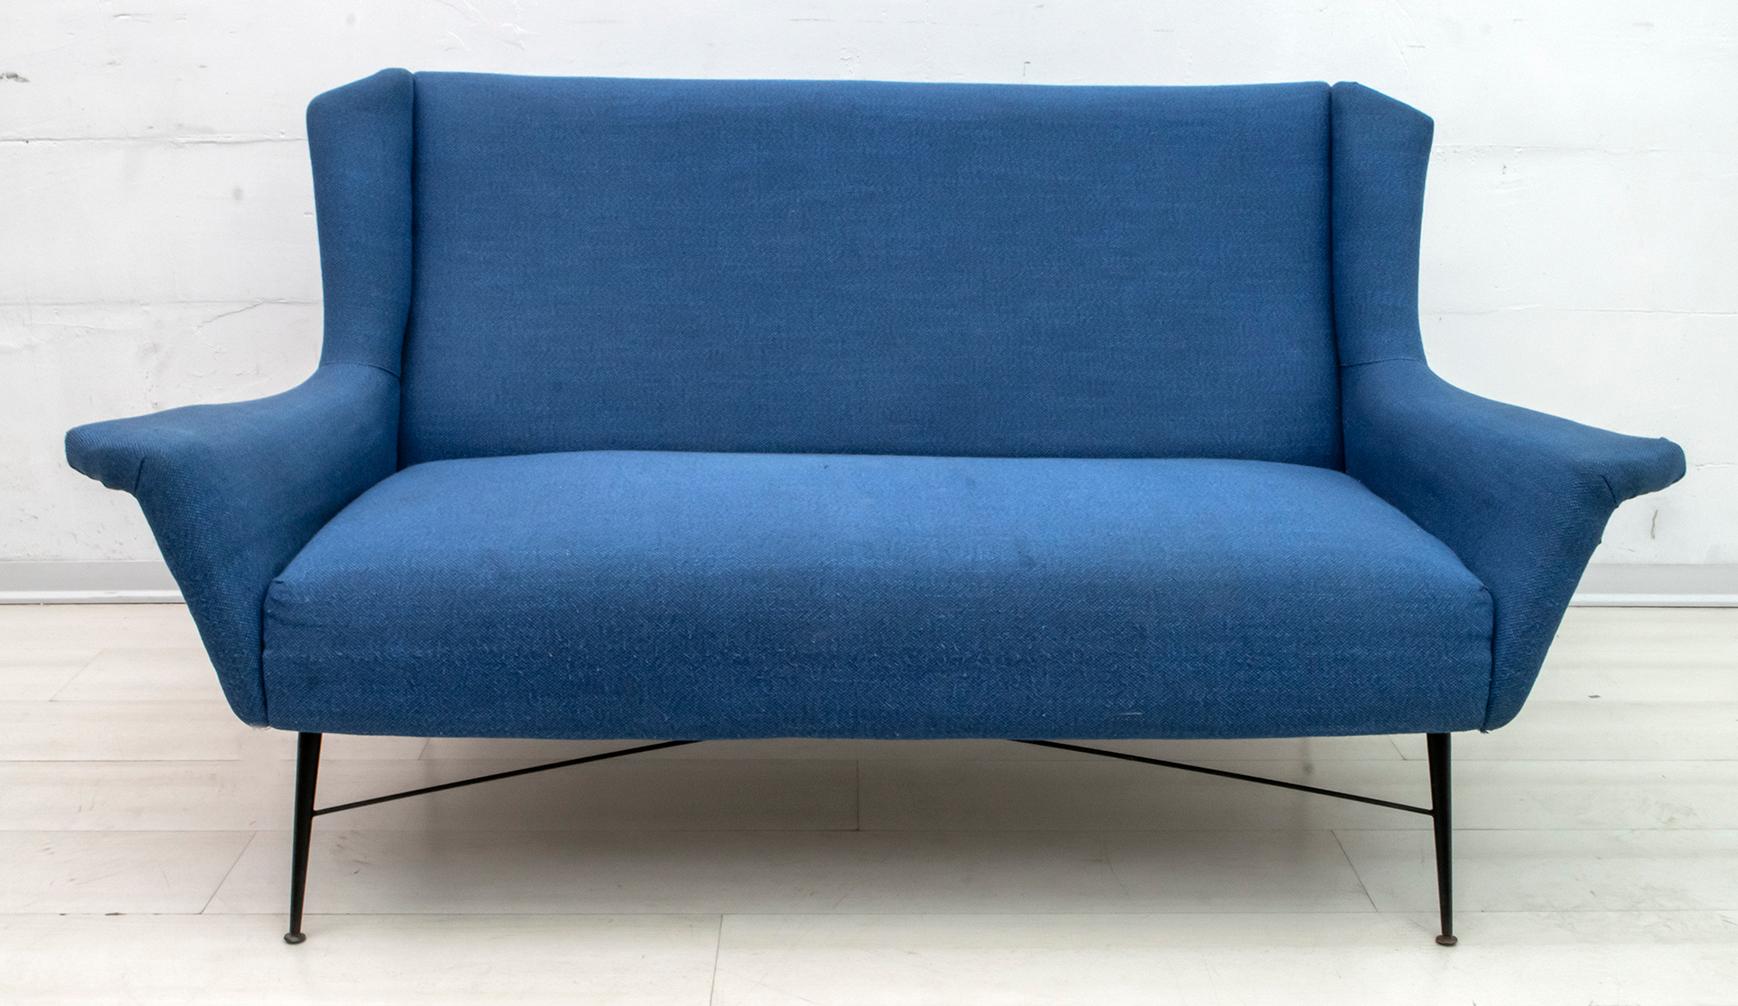 Sofa designed by Gigi Radice for Minotti. Made with solid wood structure and upholstery in blue fabric and legs in black lacquered metal. It is recommended to redo the coating.